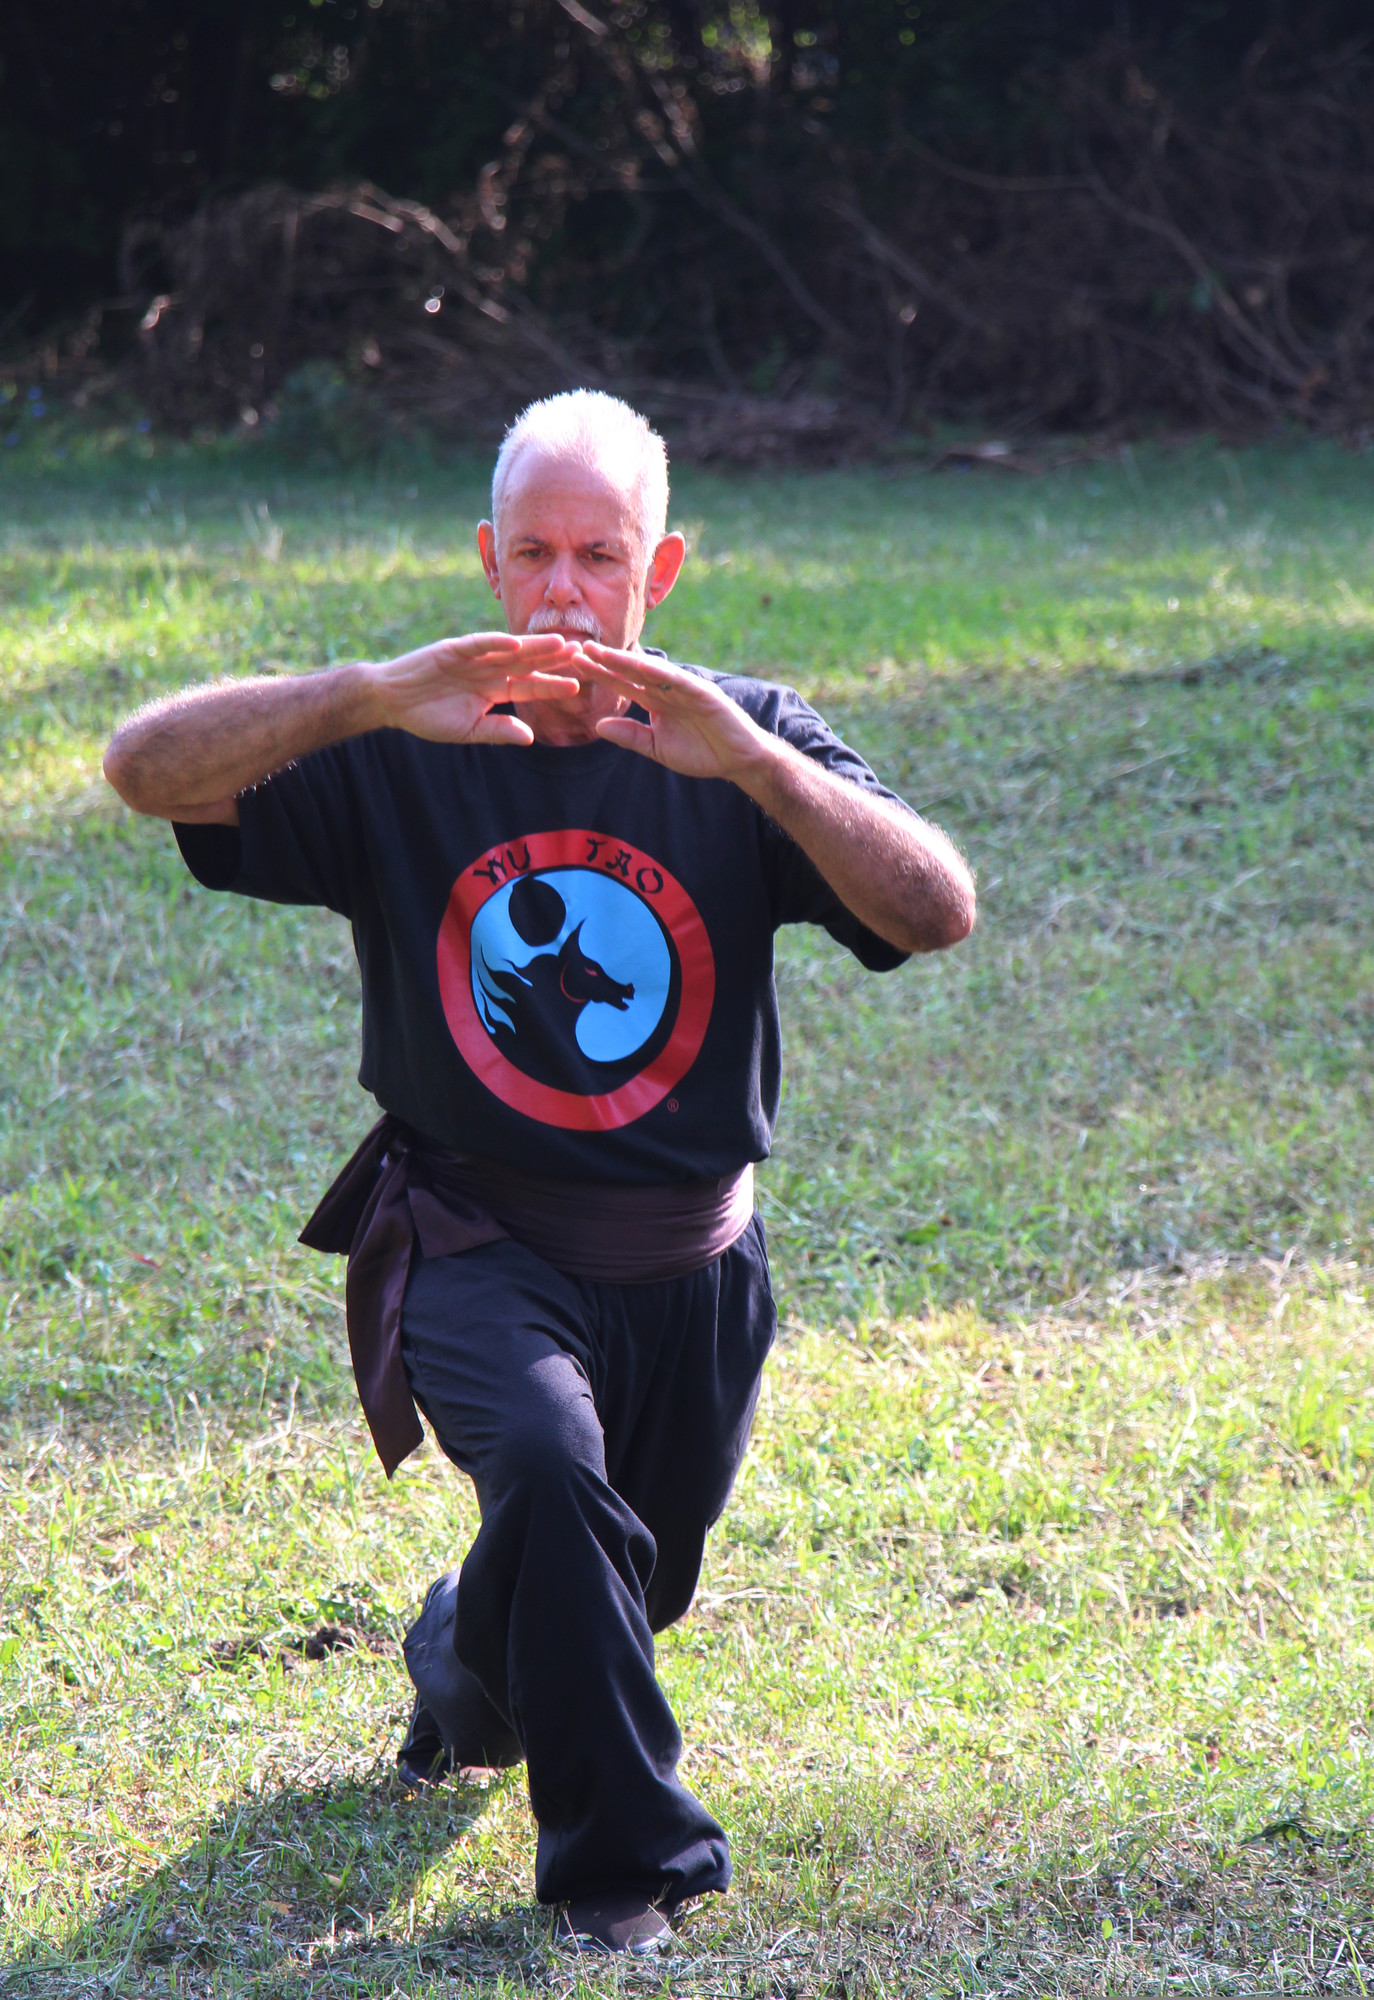 Bill Neylon was one of the instructors at last Saturday’s event.